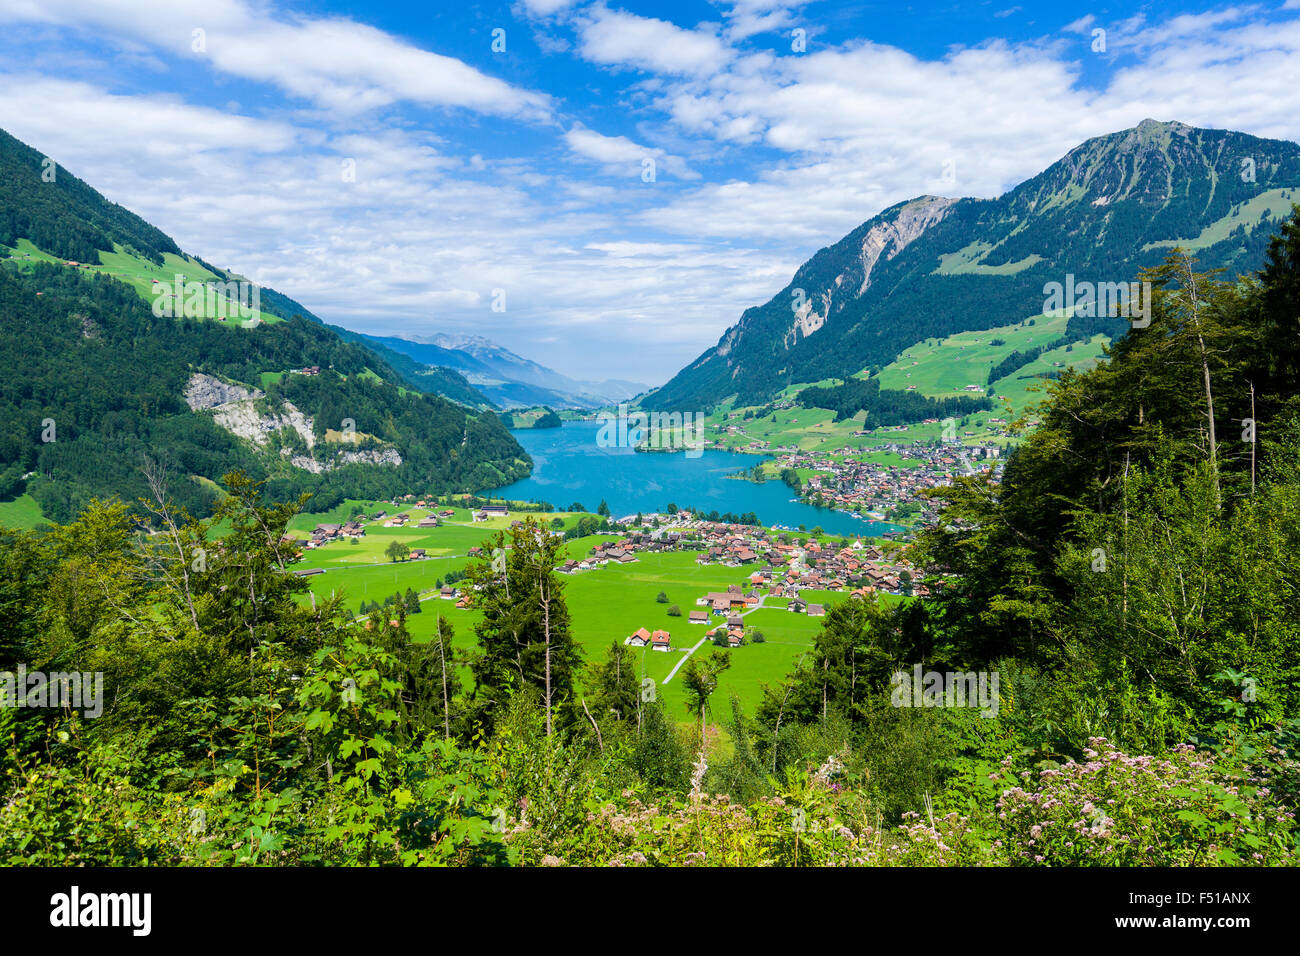 High altitude landscape with the Lake Lungern, a village, mountains and green meadows at the bottom of Brünig Pass Stock Photo